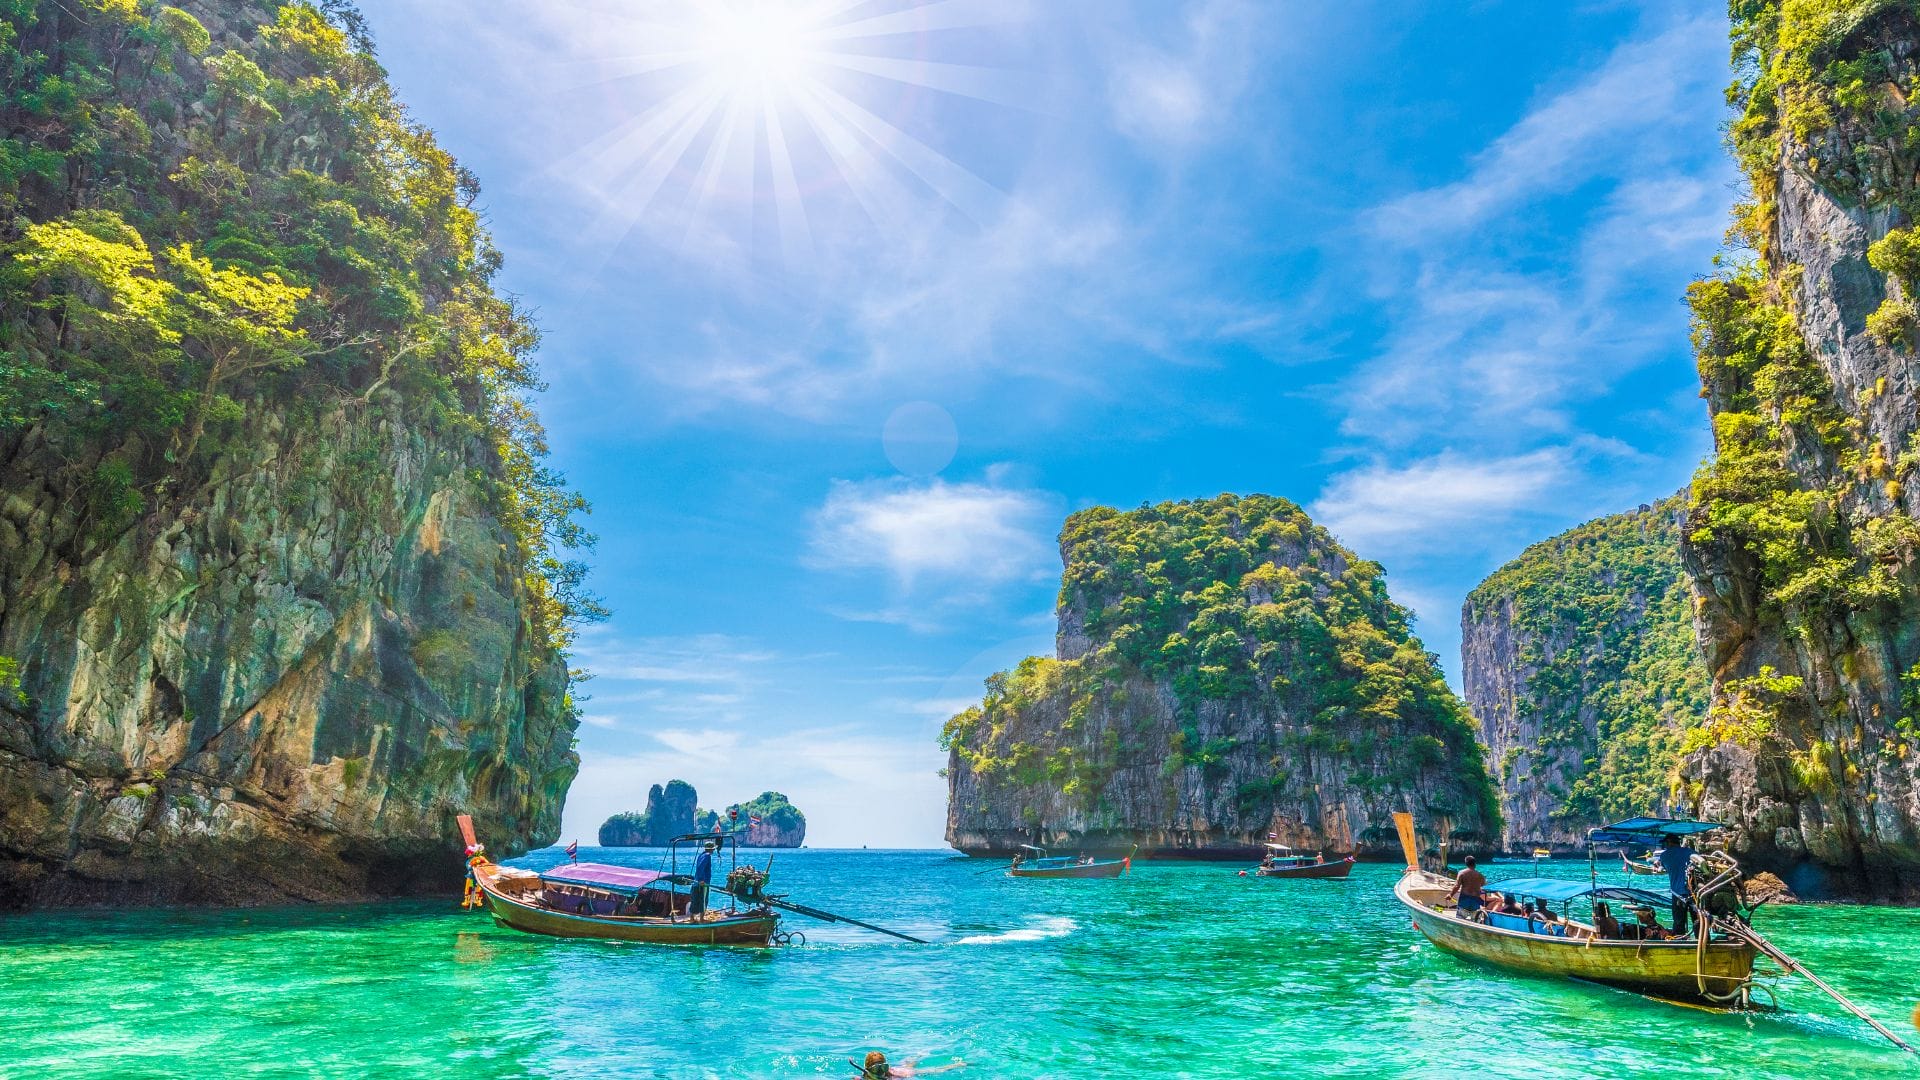 Top 5 Things to do in Phuket